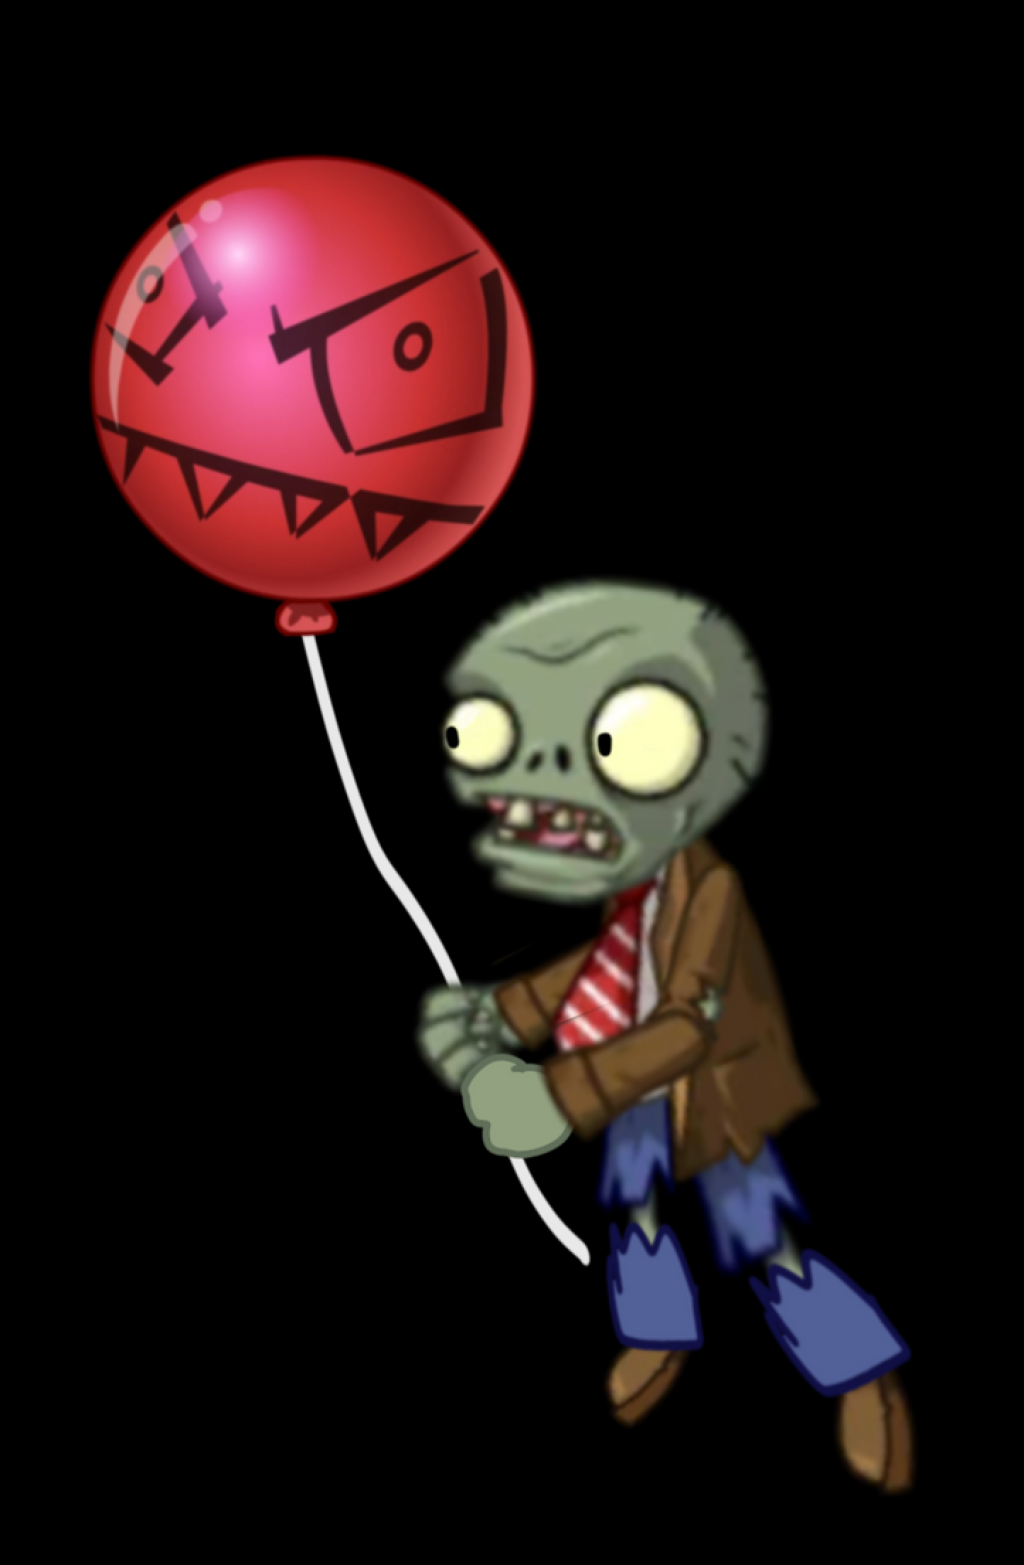 Picture of: Beta Balloon zombie by blandonproductions on DeviantArt